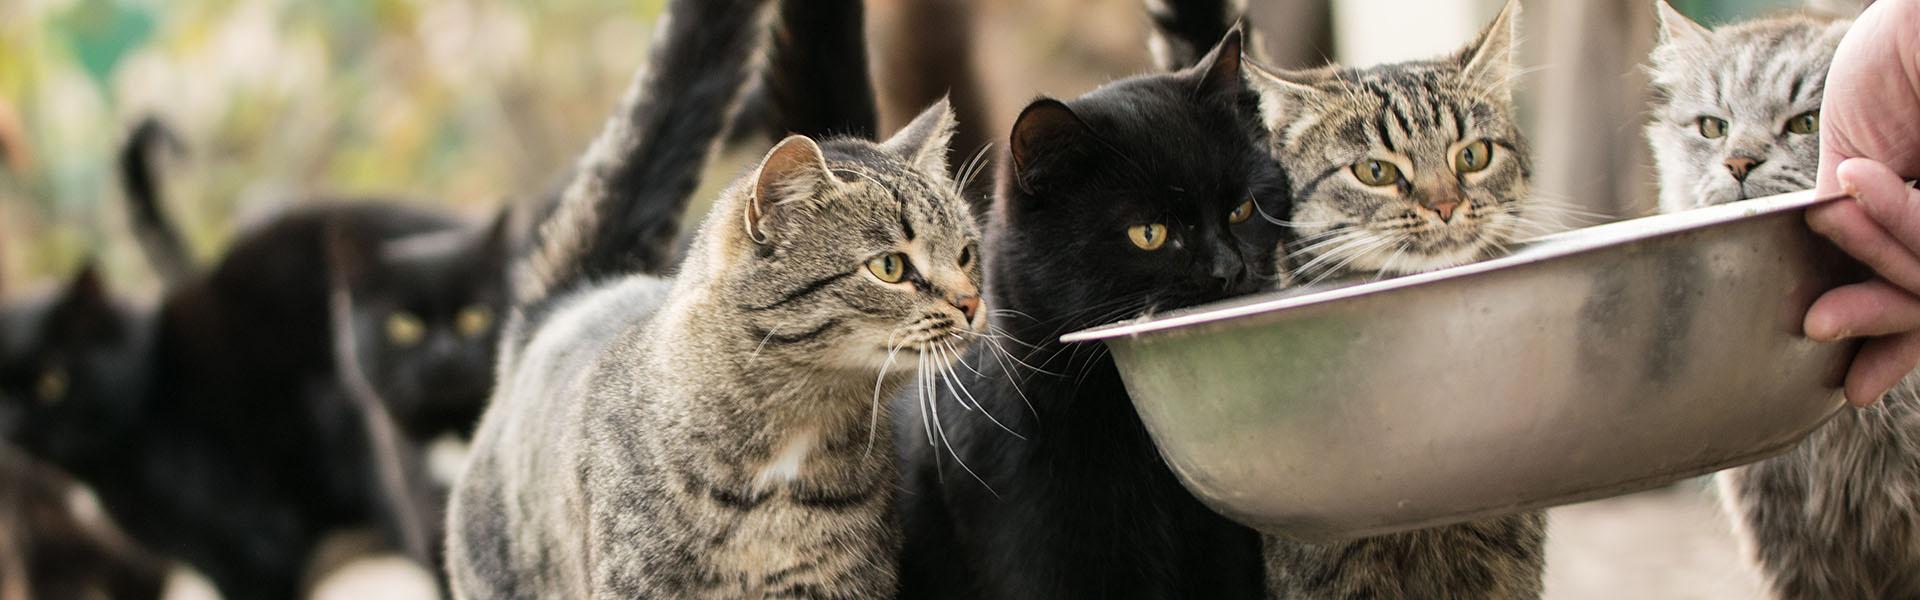 Cats wait to be fed from a bowl